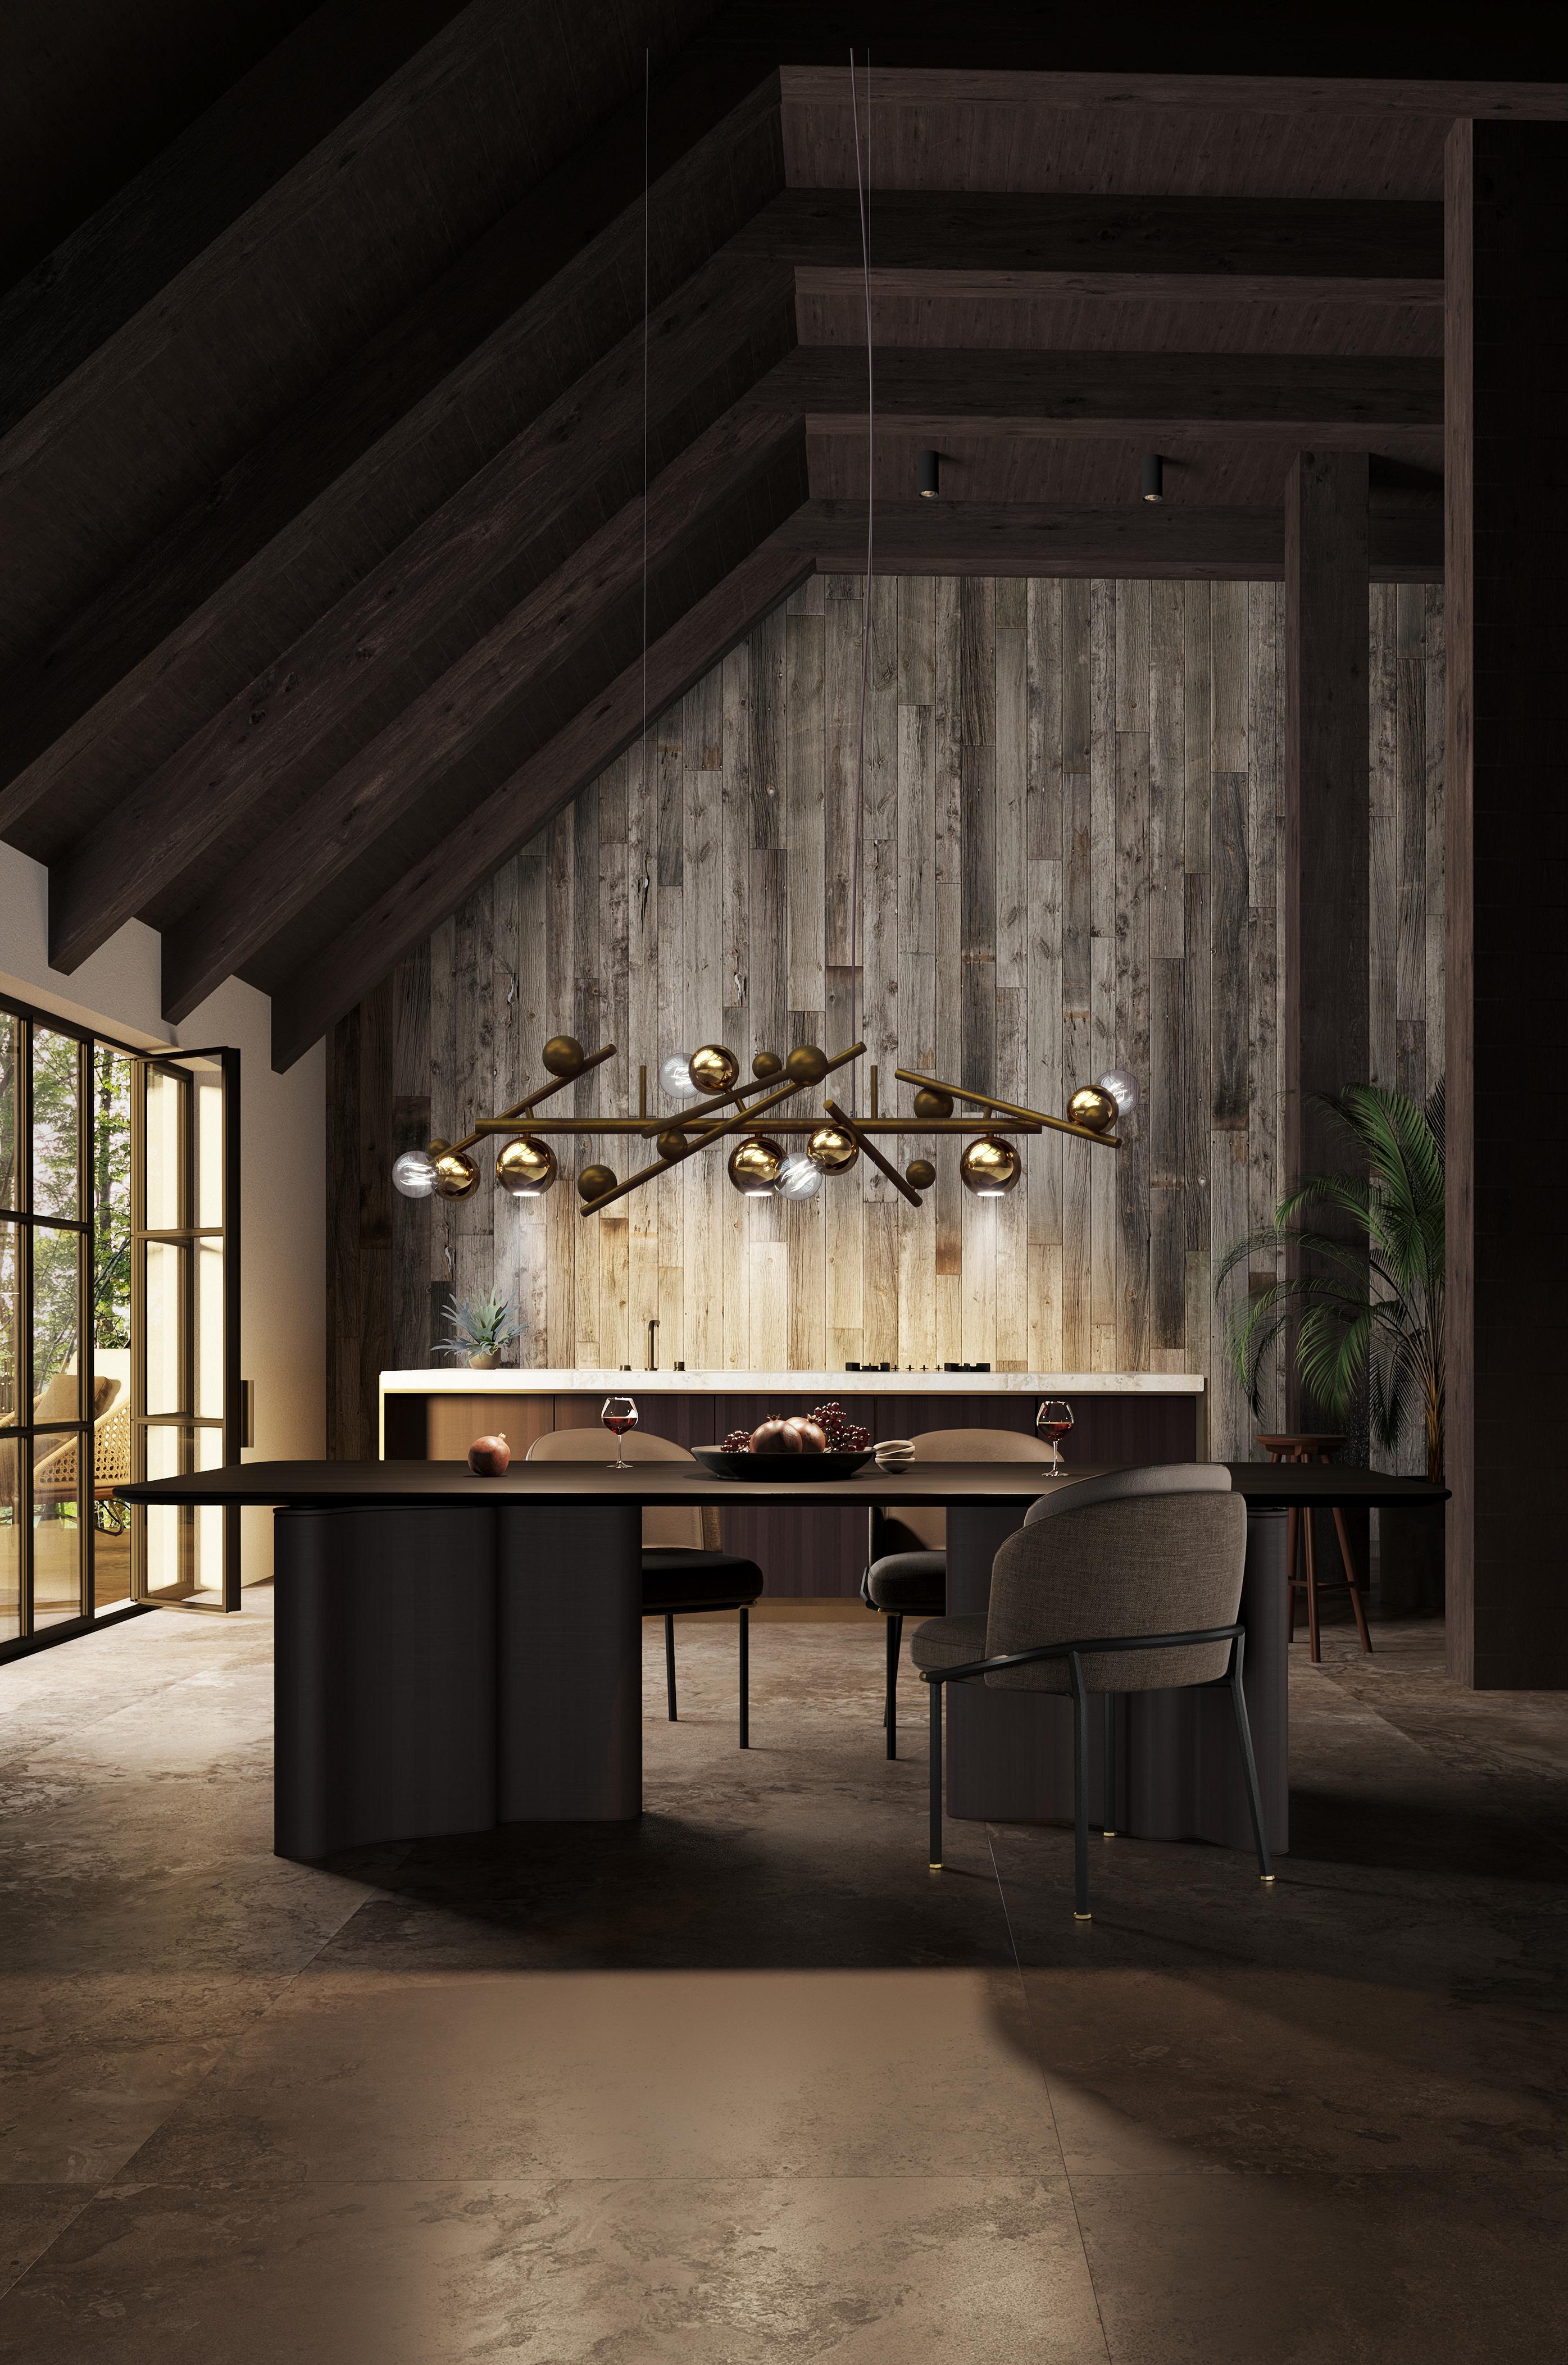 The Galaxy is a modern pendant in a nickel finish with the globes in a different finish and is designed by William Brand, founder of Brand van Egmond. Full of character and created to bring light above a table, the pendant is available in 5